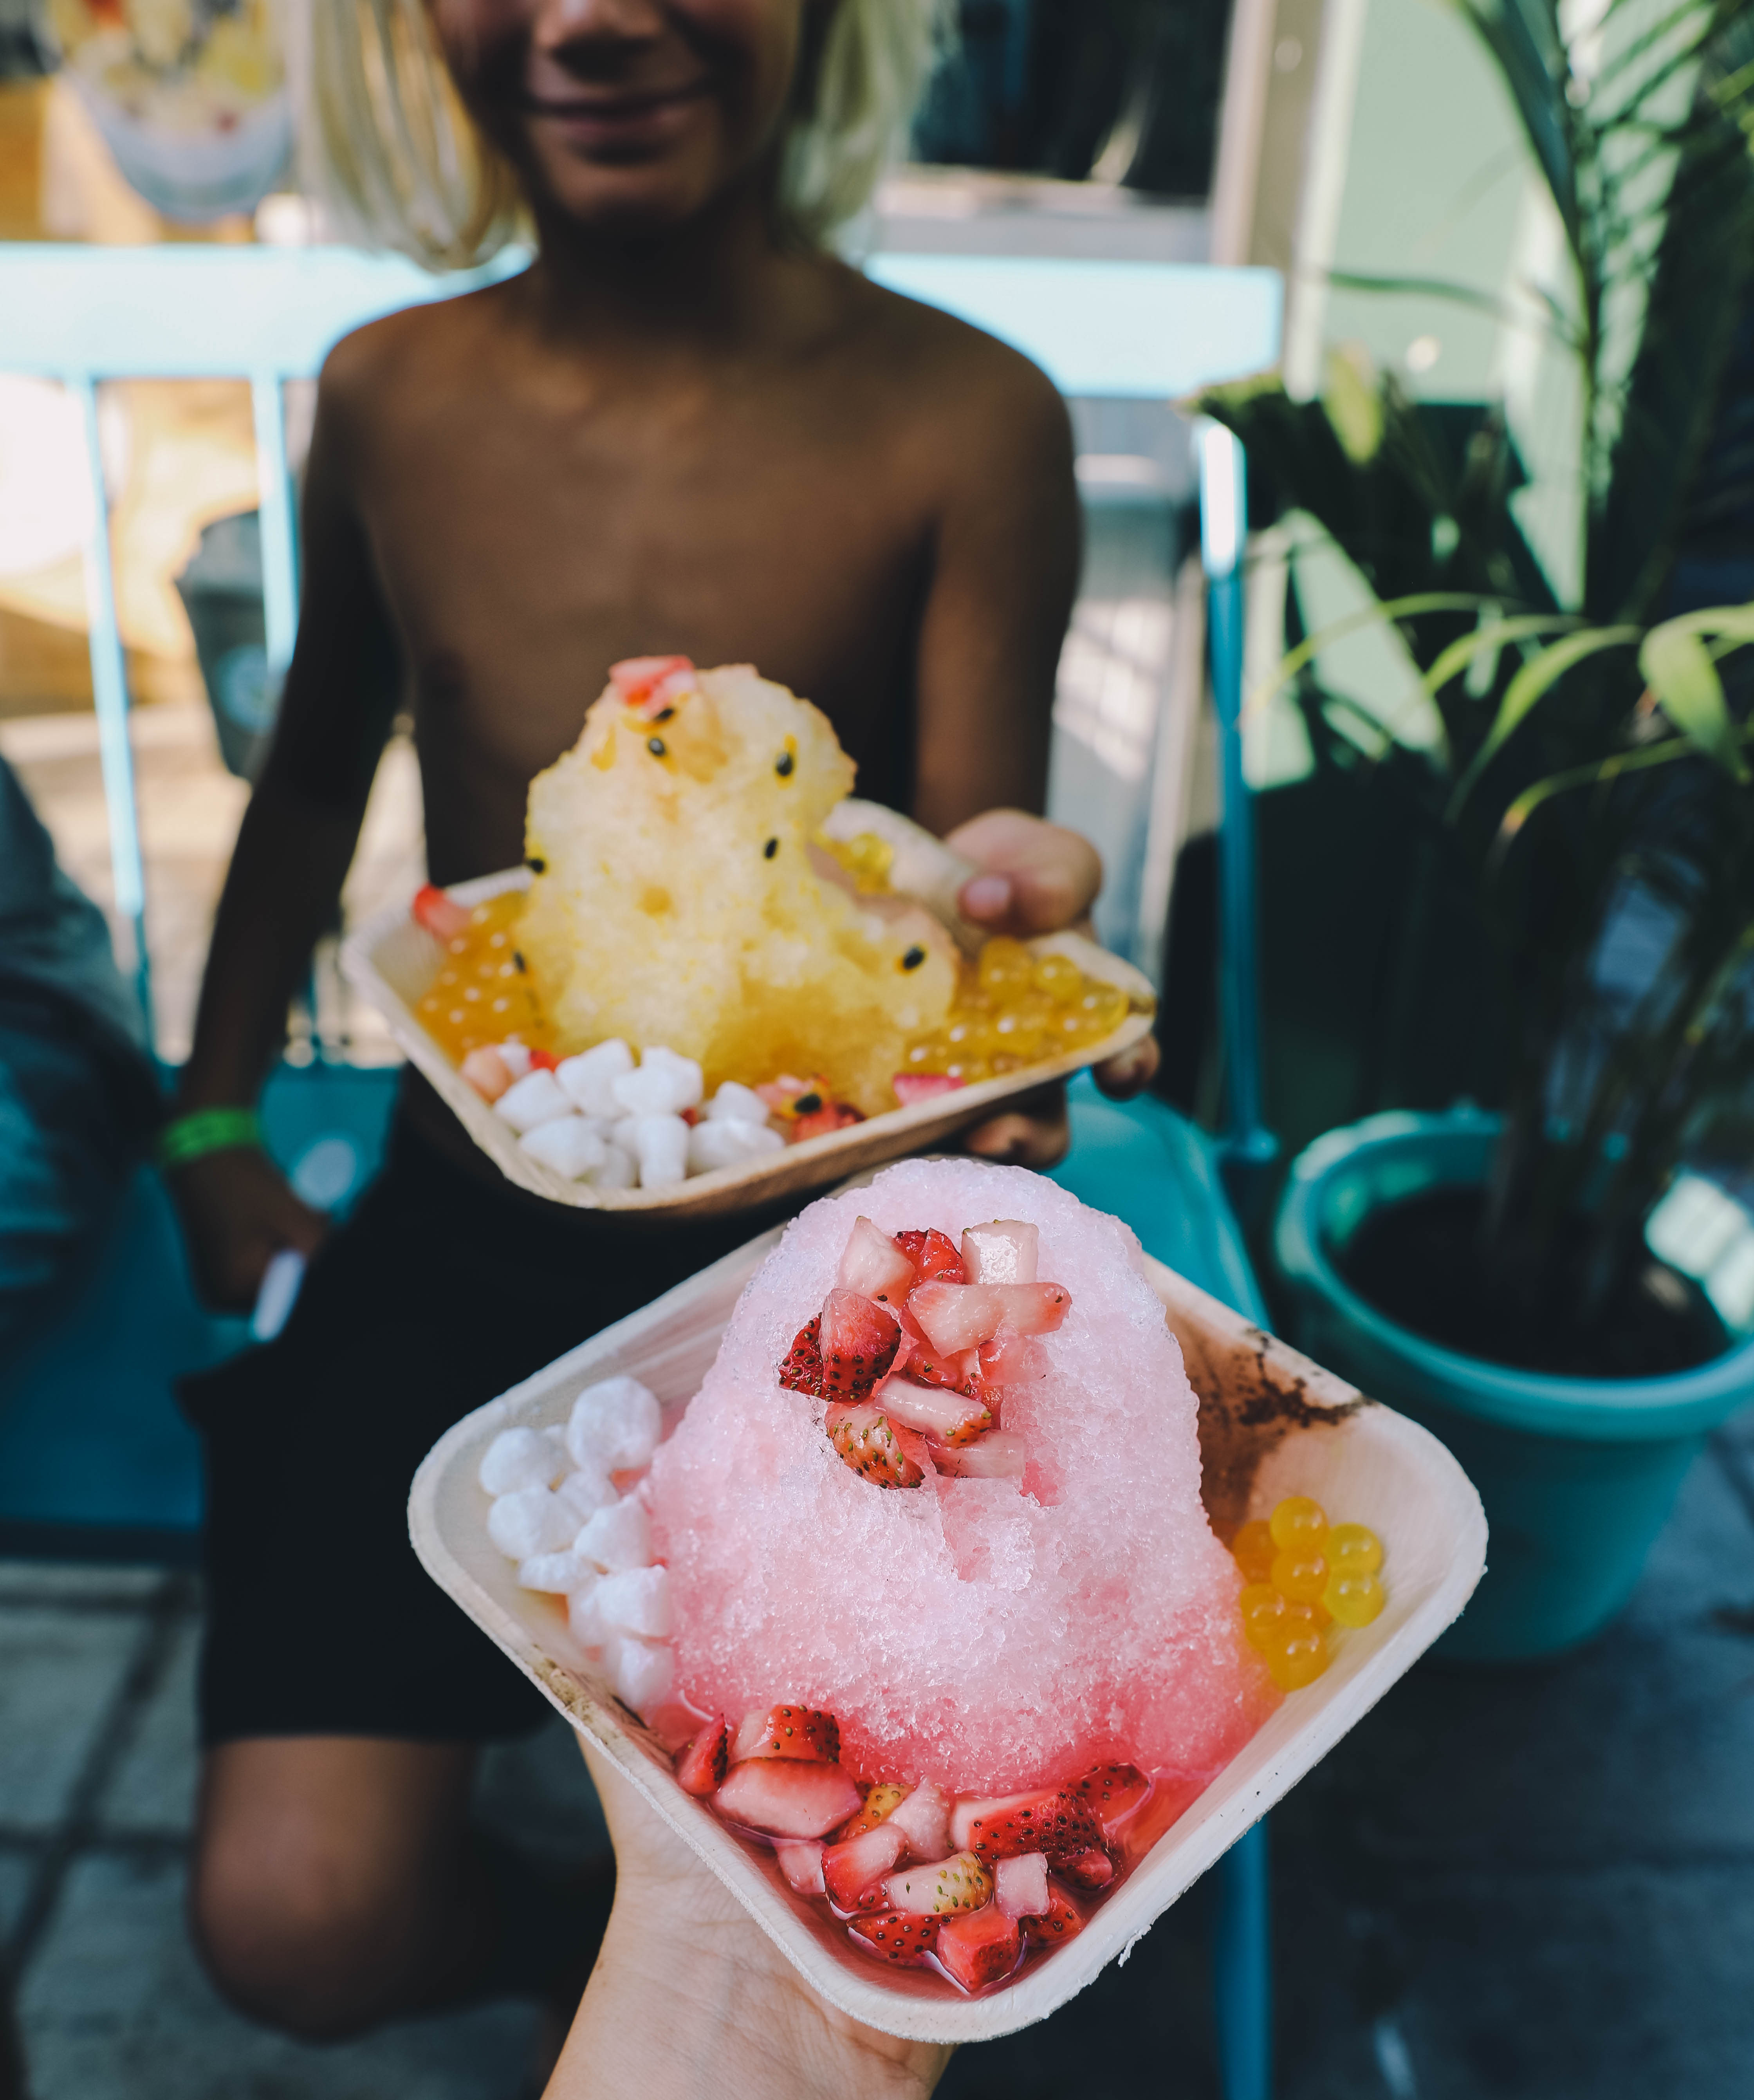 shaved ice with fruit snack